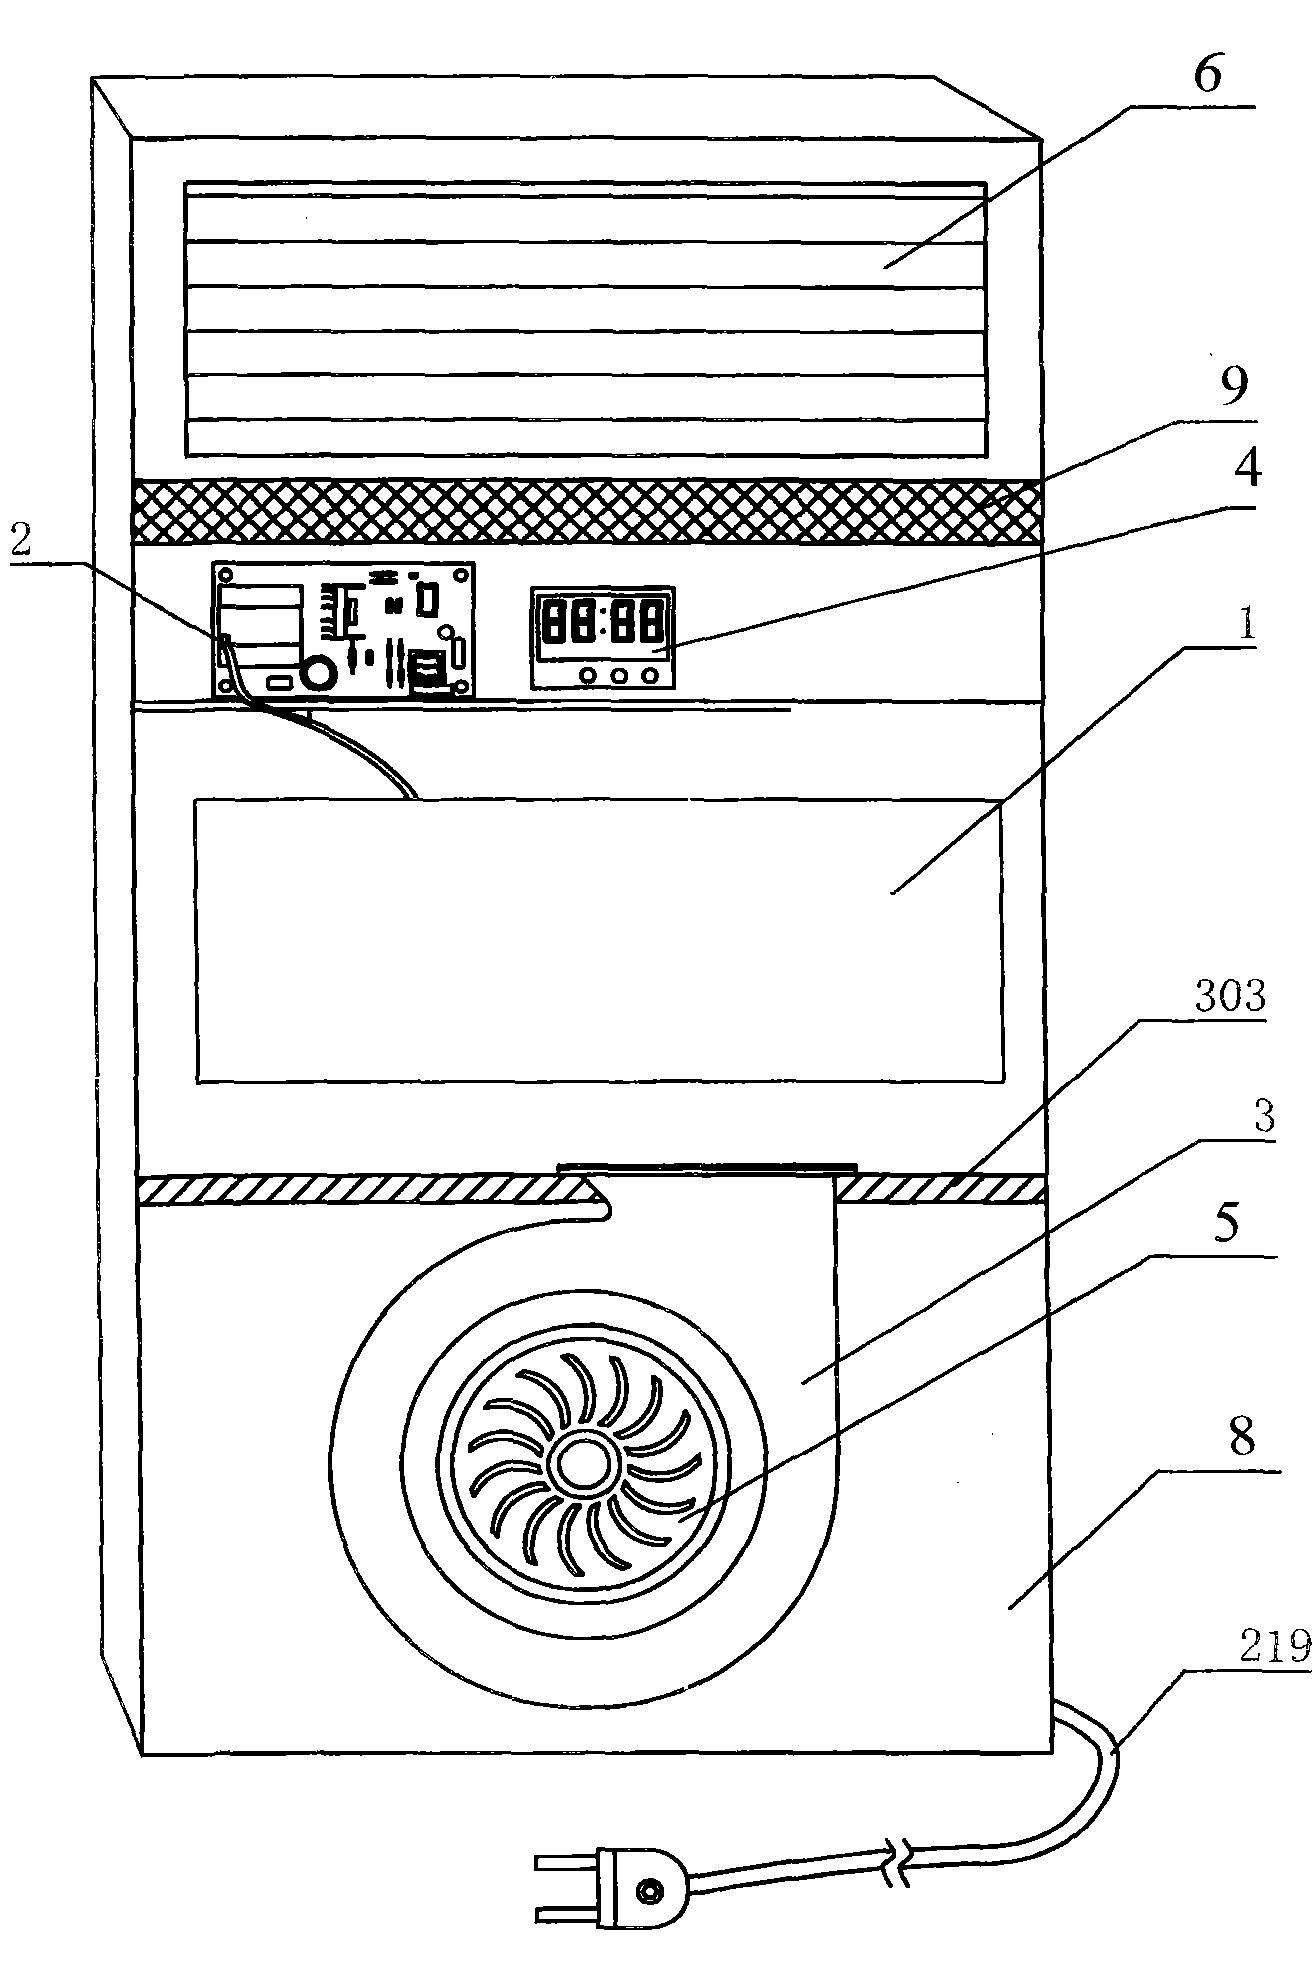 Purifier with metal band-plate structure reactor